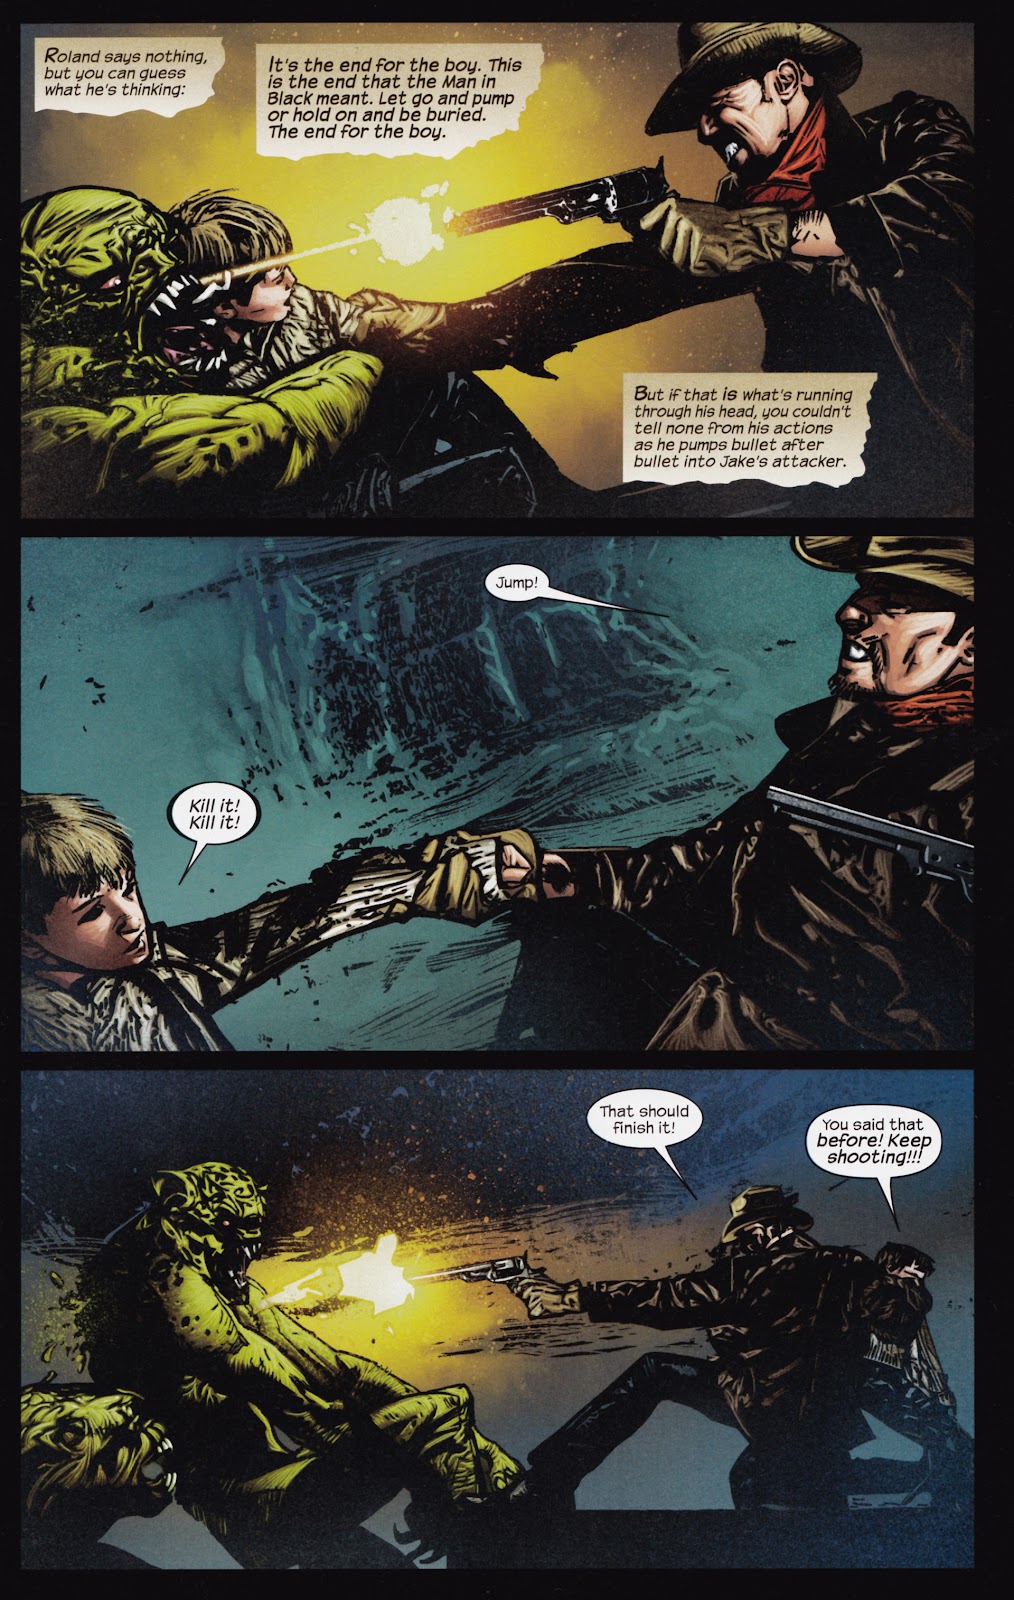 Dark Tower: The Gunslinger - The Man in Black issue 3 - Page 6